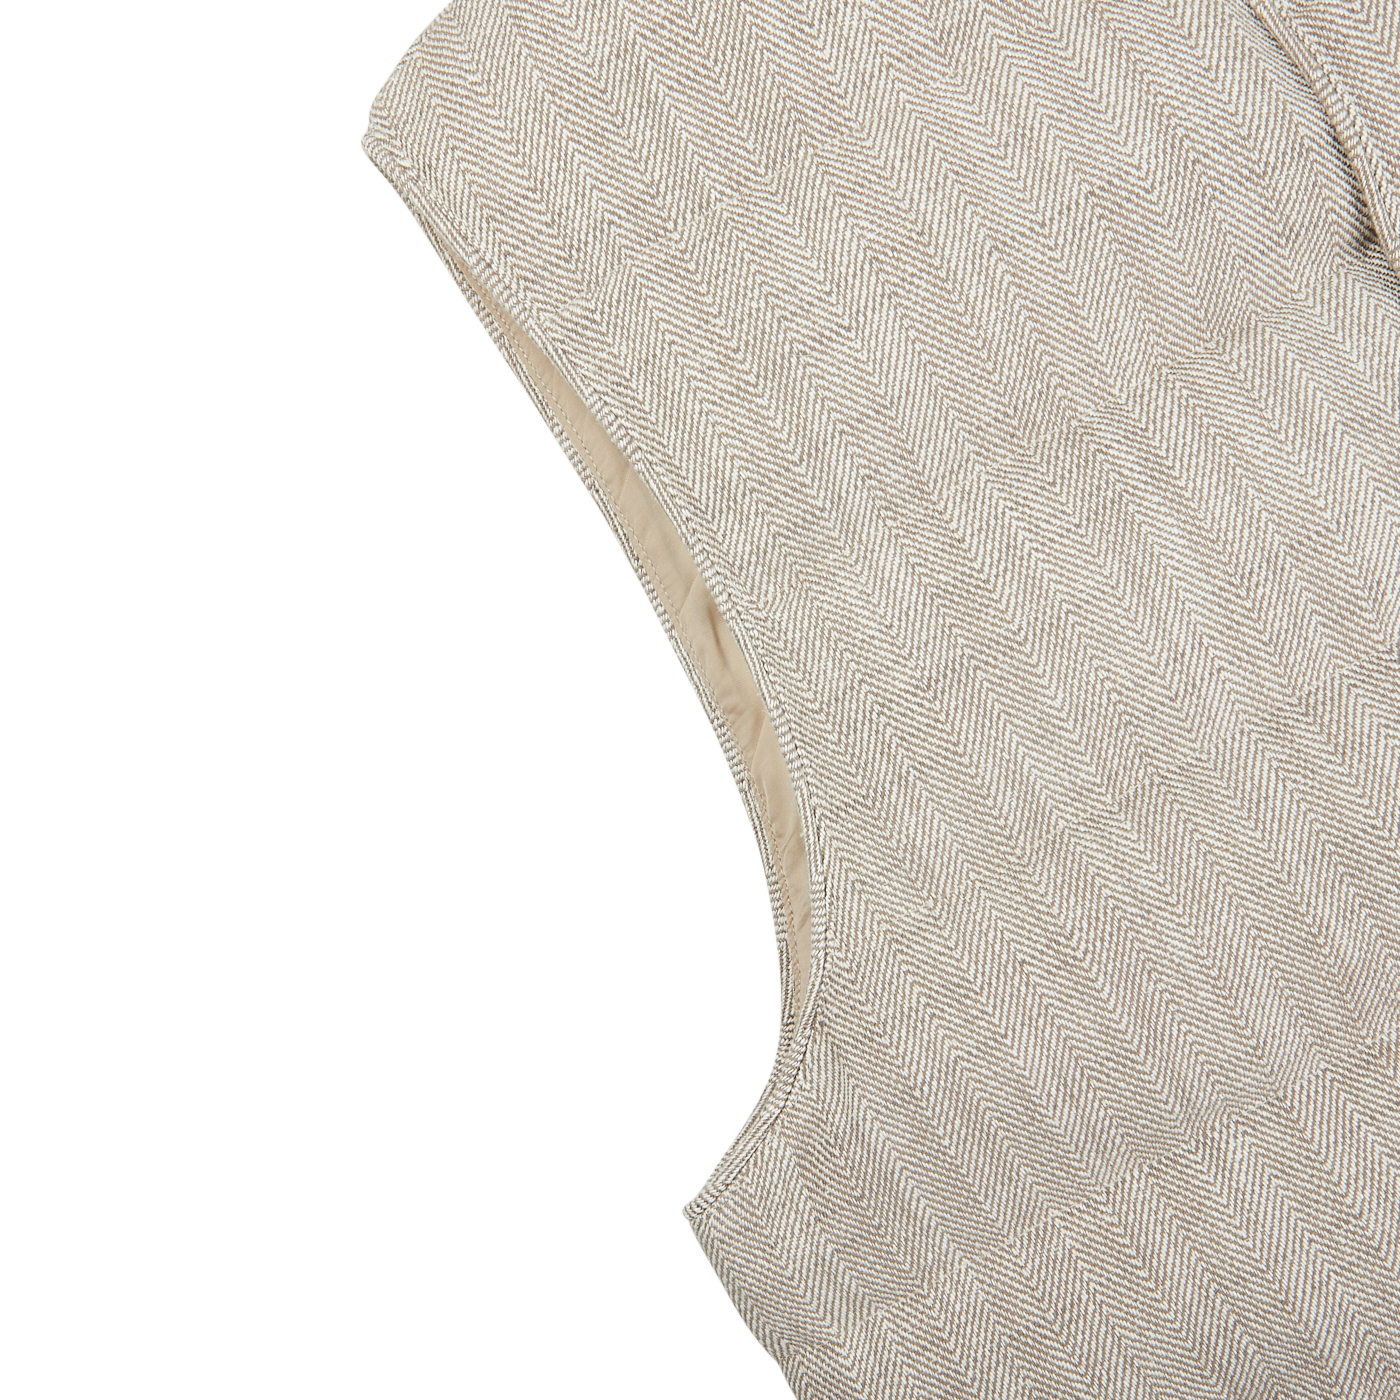 A close up of a Stenströms Beige Herringbone Cotton Linen Down Padded Gilet on a white surface.